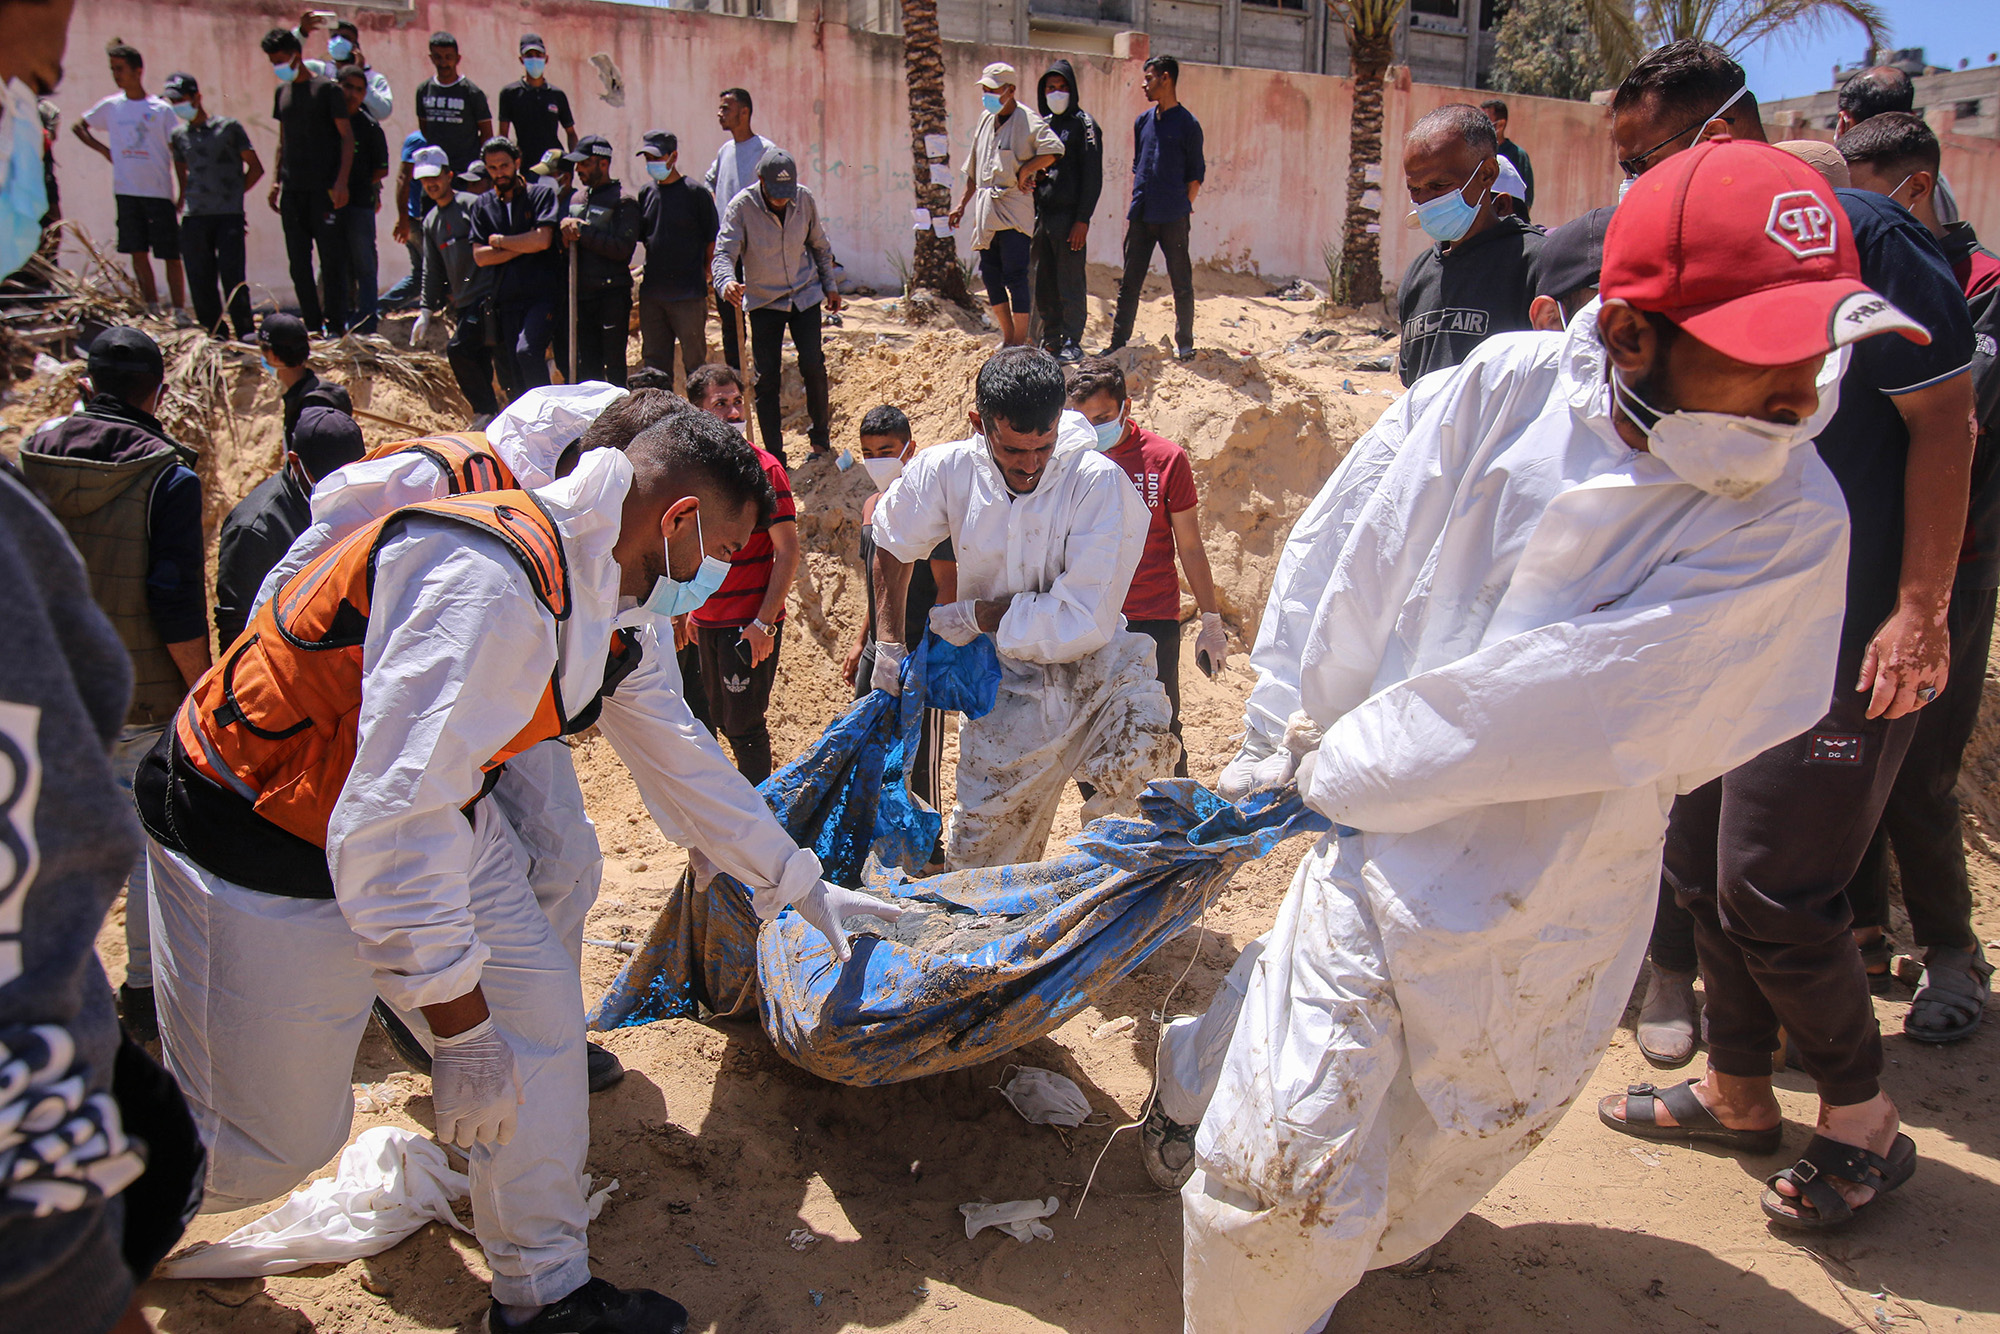 Palestinian health workers recover buried bodies from a mass grave at the Nasser Medical Hospital compound in Khan Younis, Gaza, on April 21.